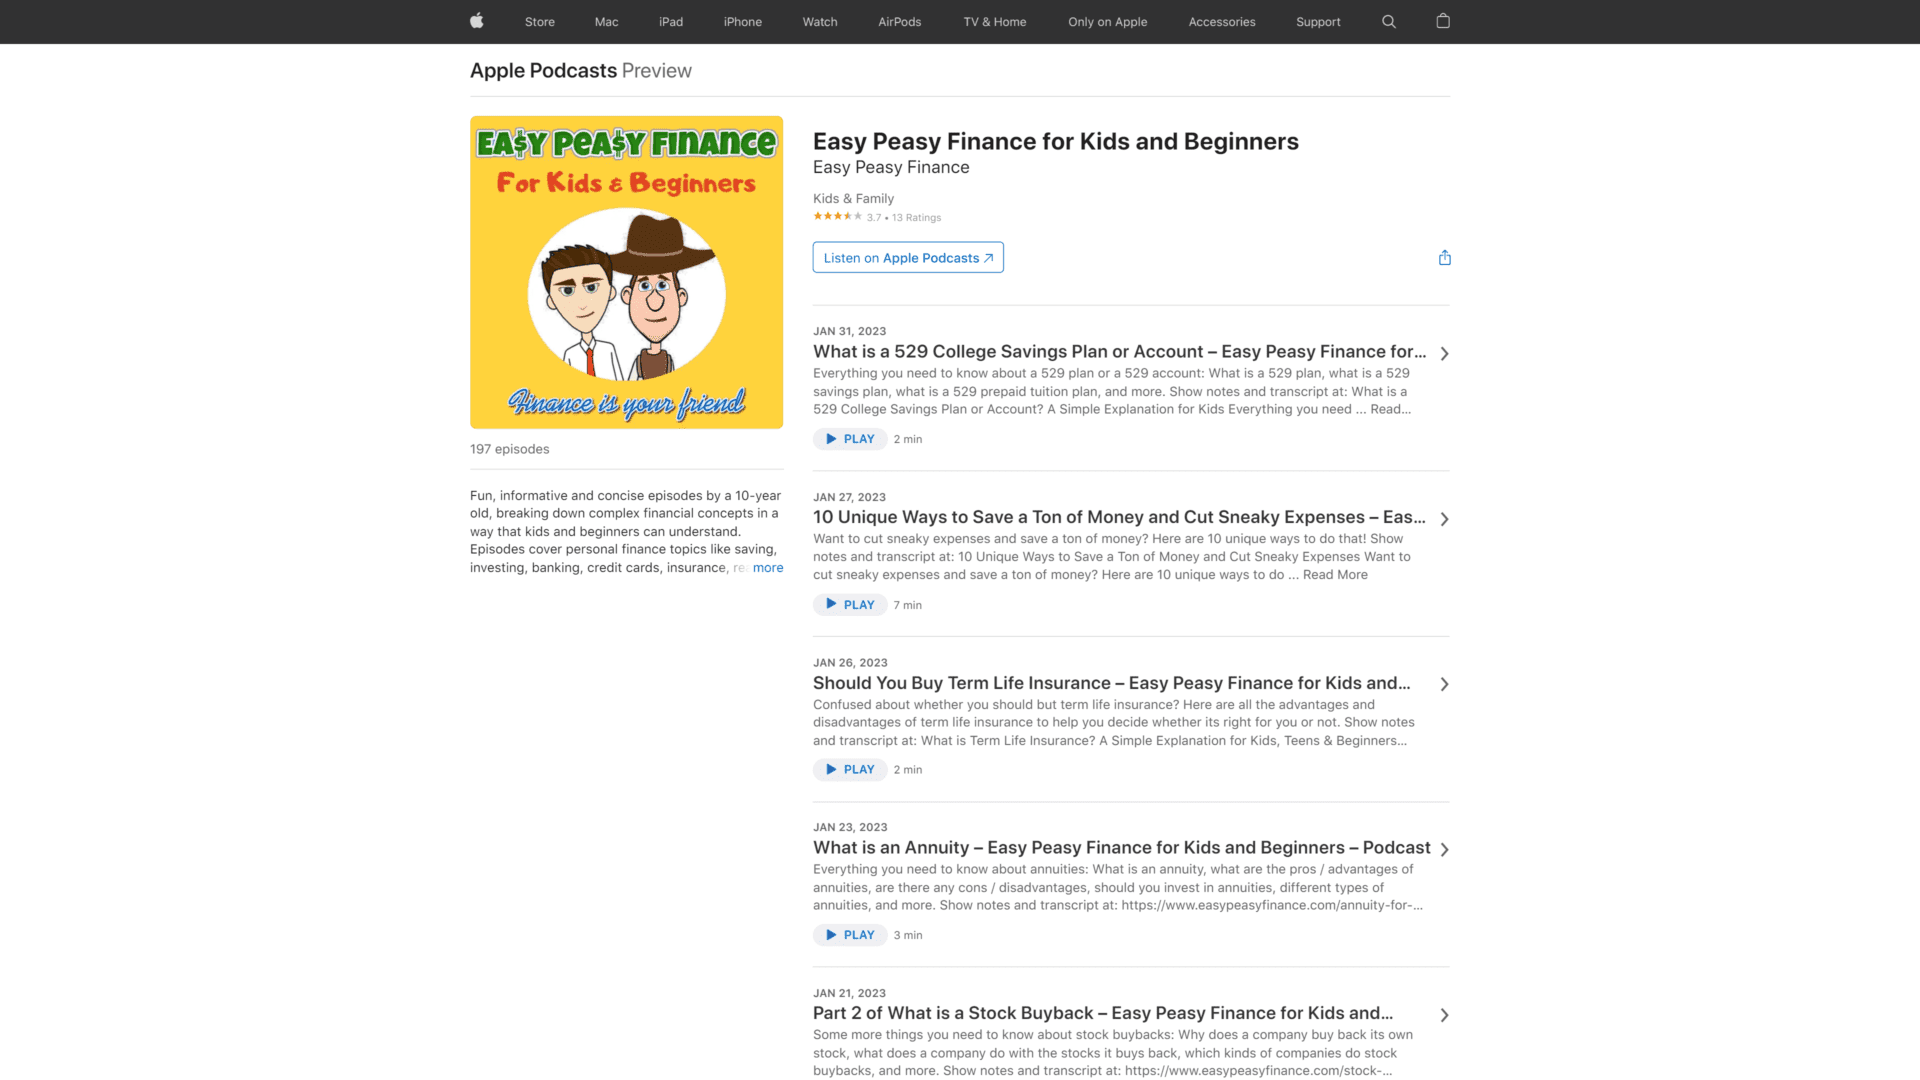 A screenshot of the easy peasy finance for kids and beginners podcast homepage